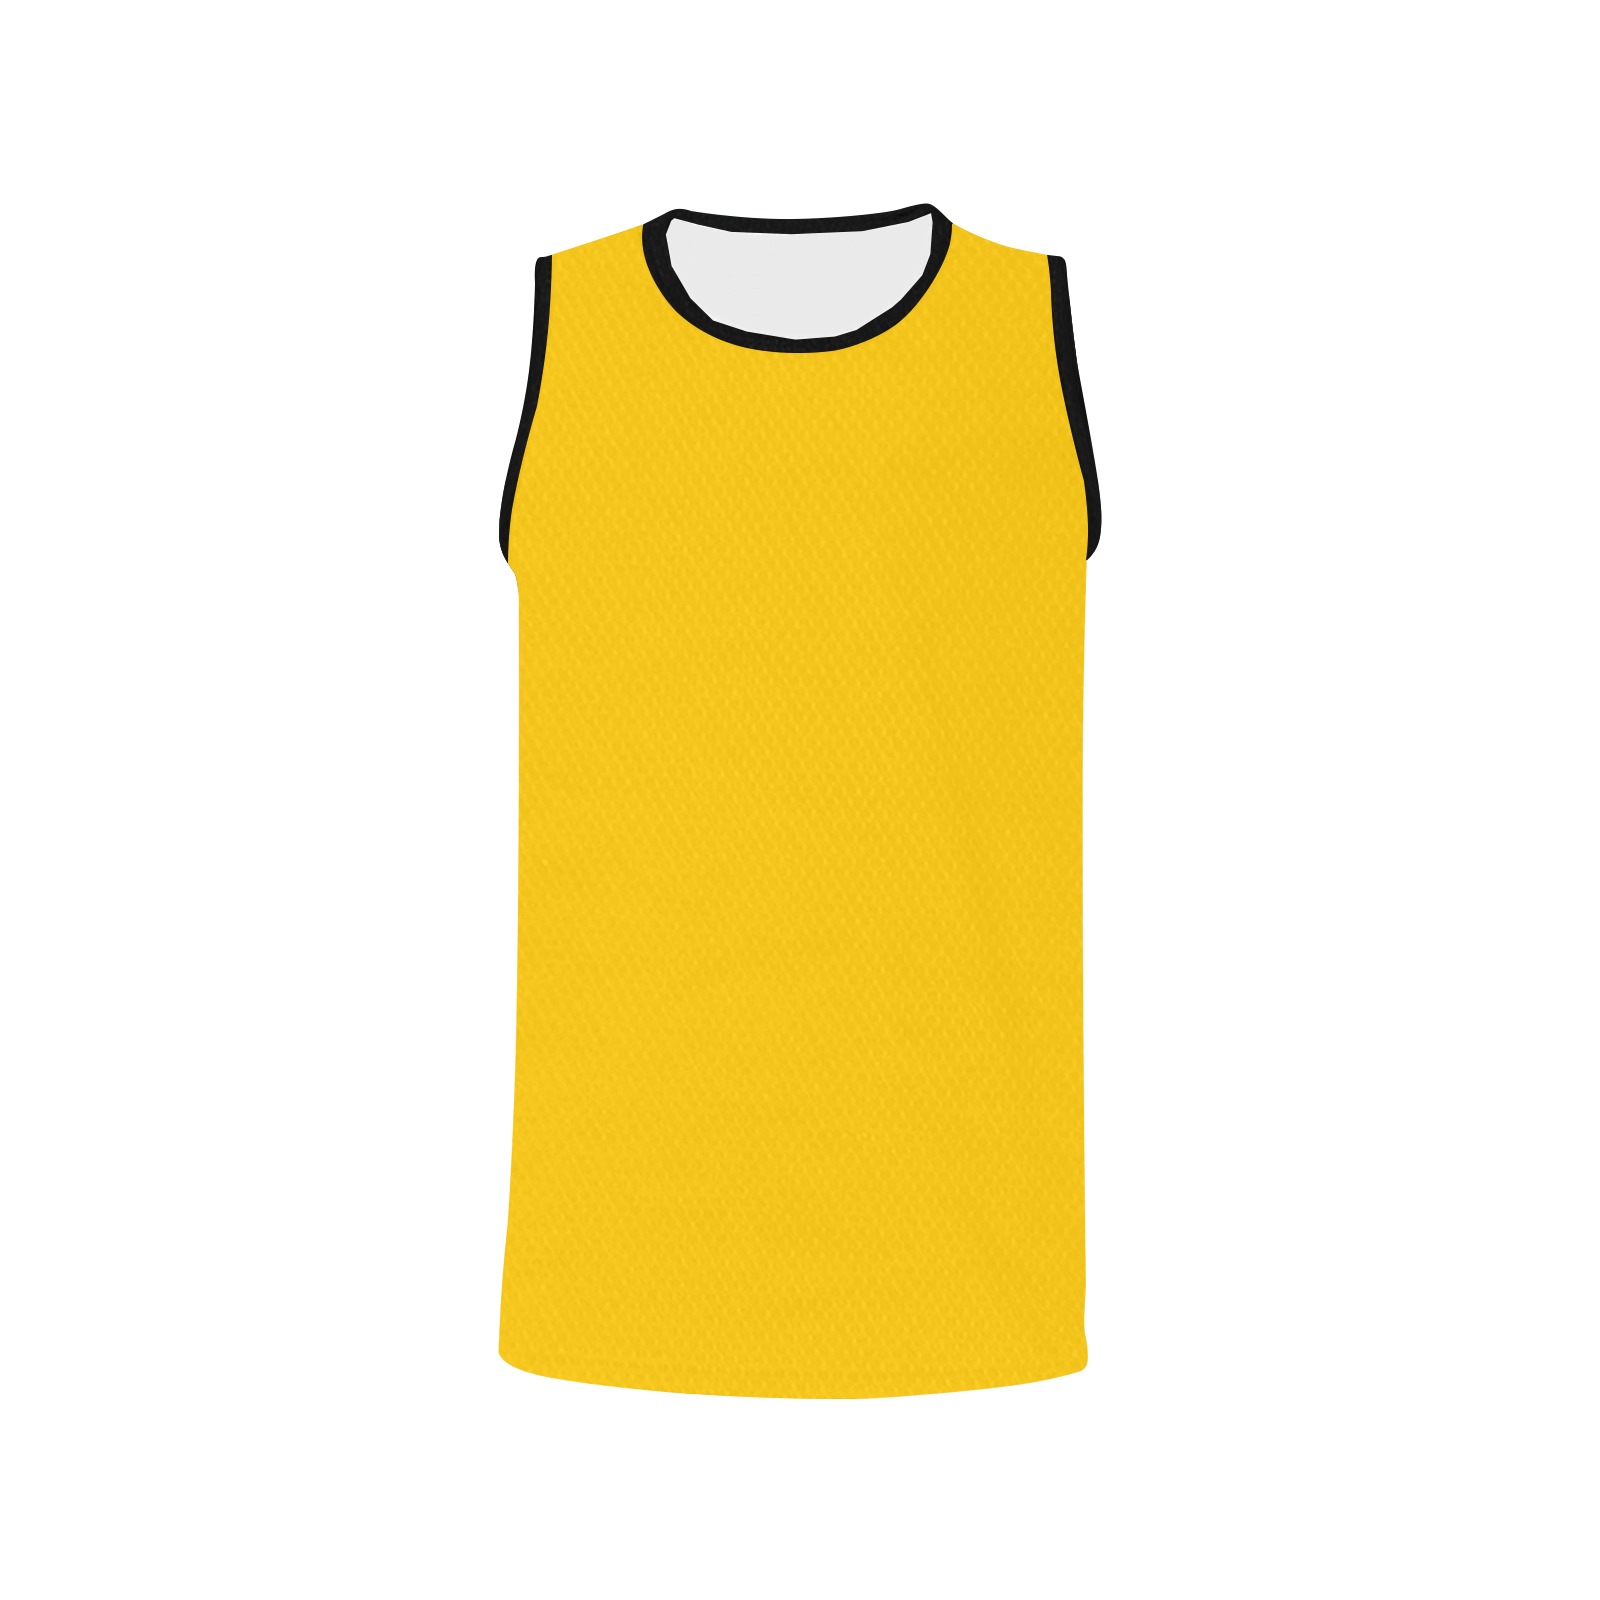 color mango All Over Print Basketball Jersey